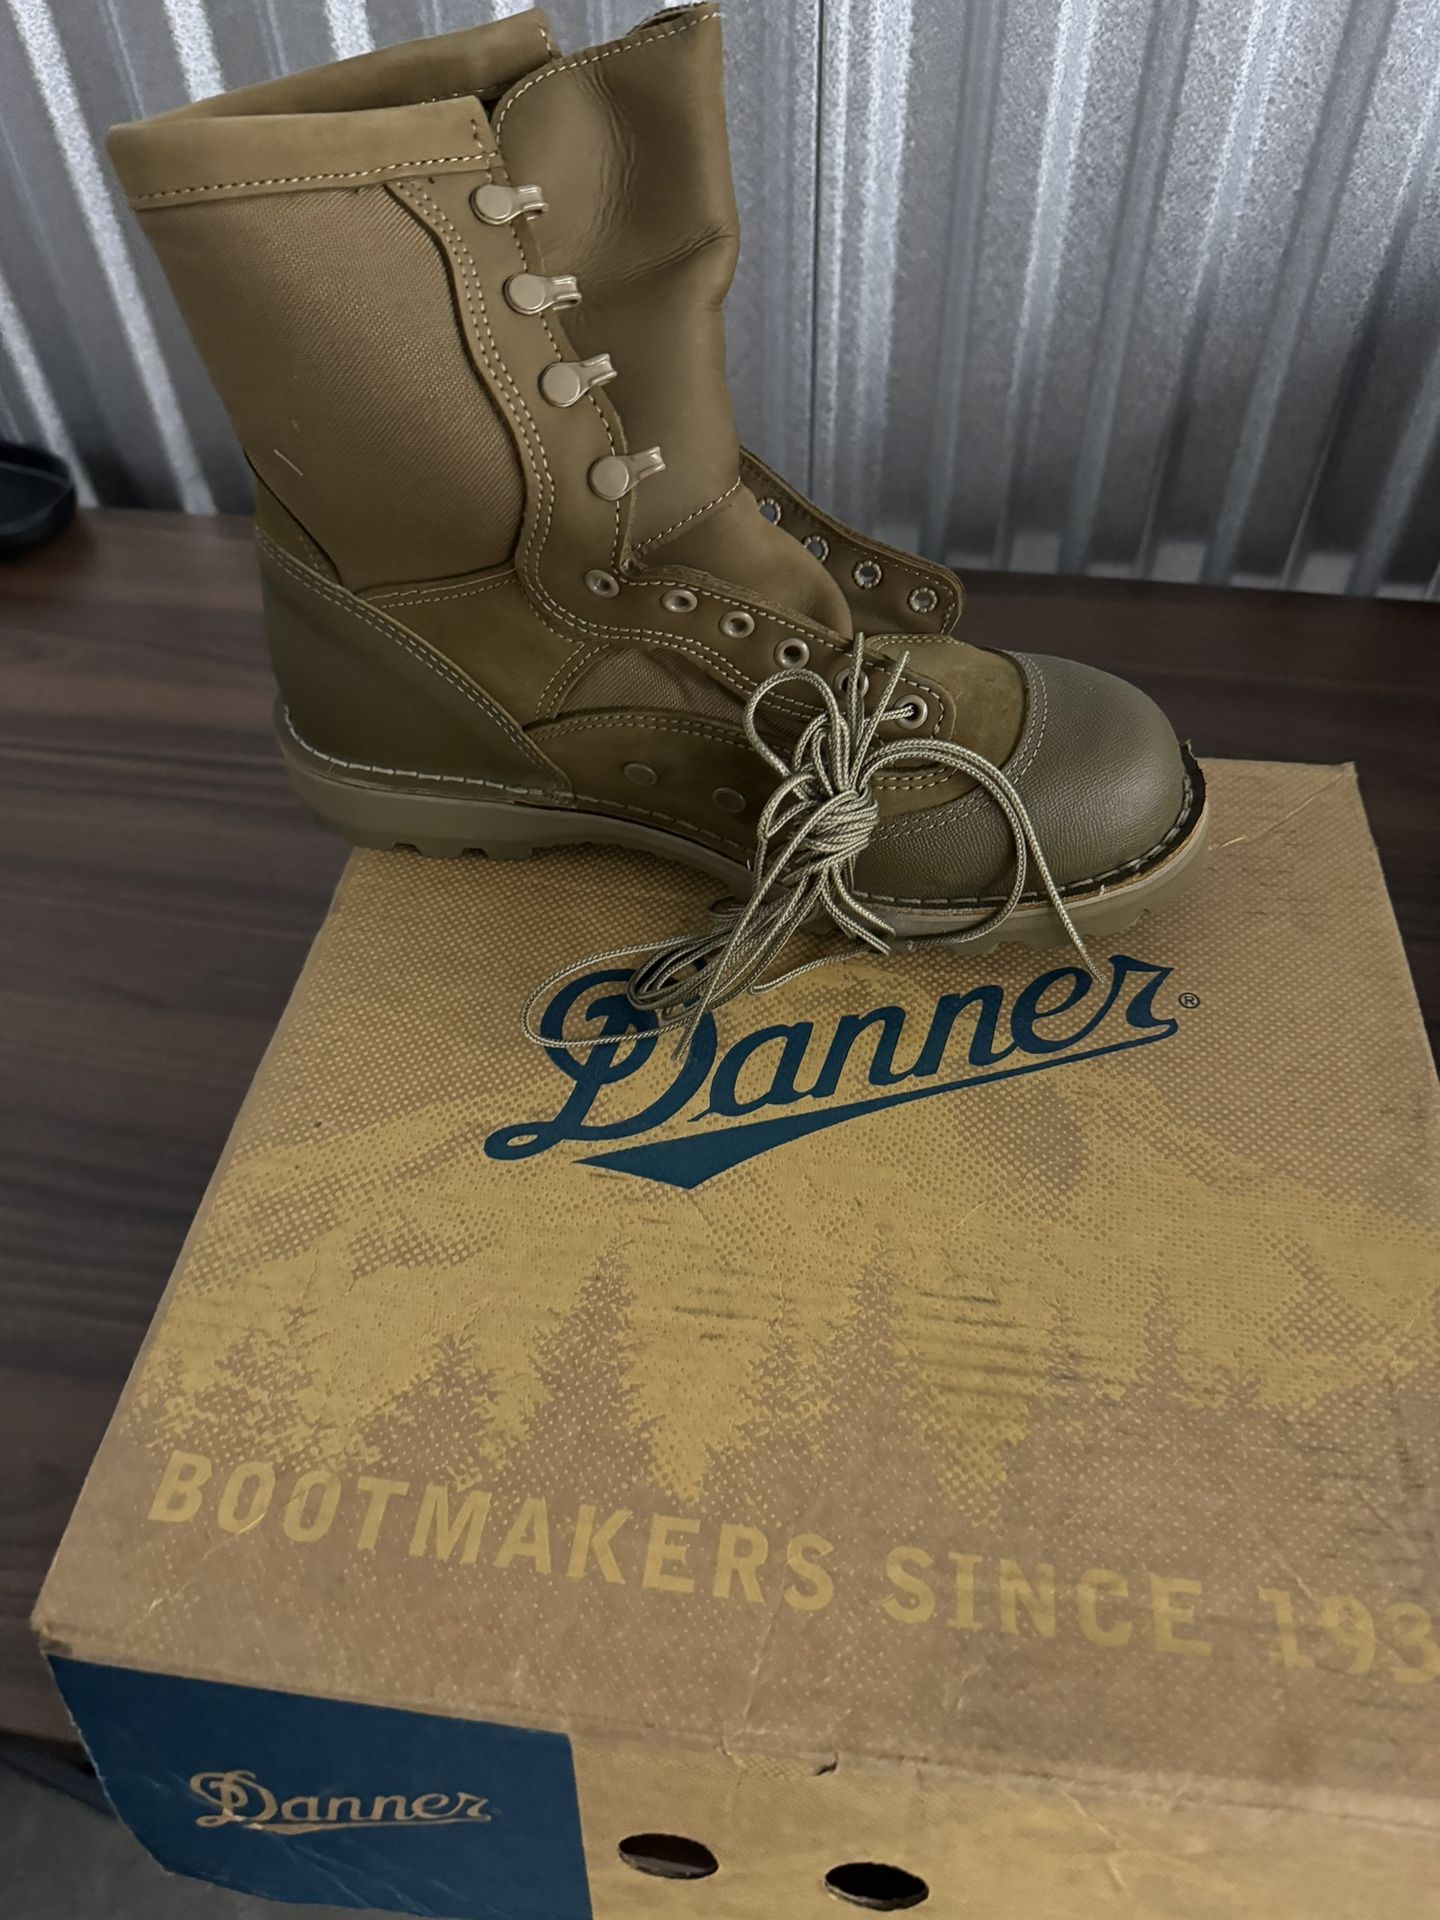 Daners Boots